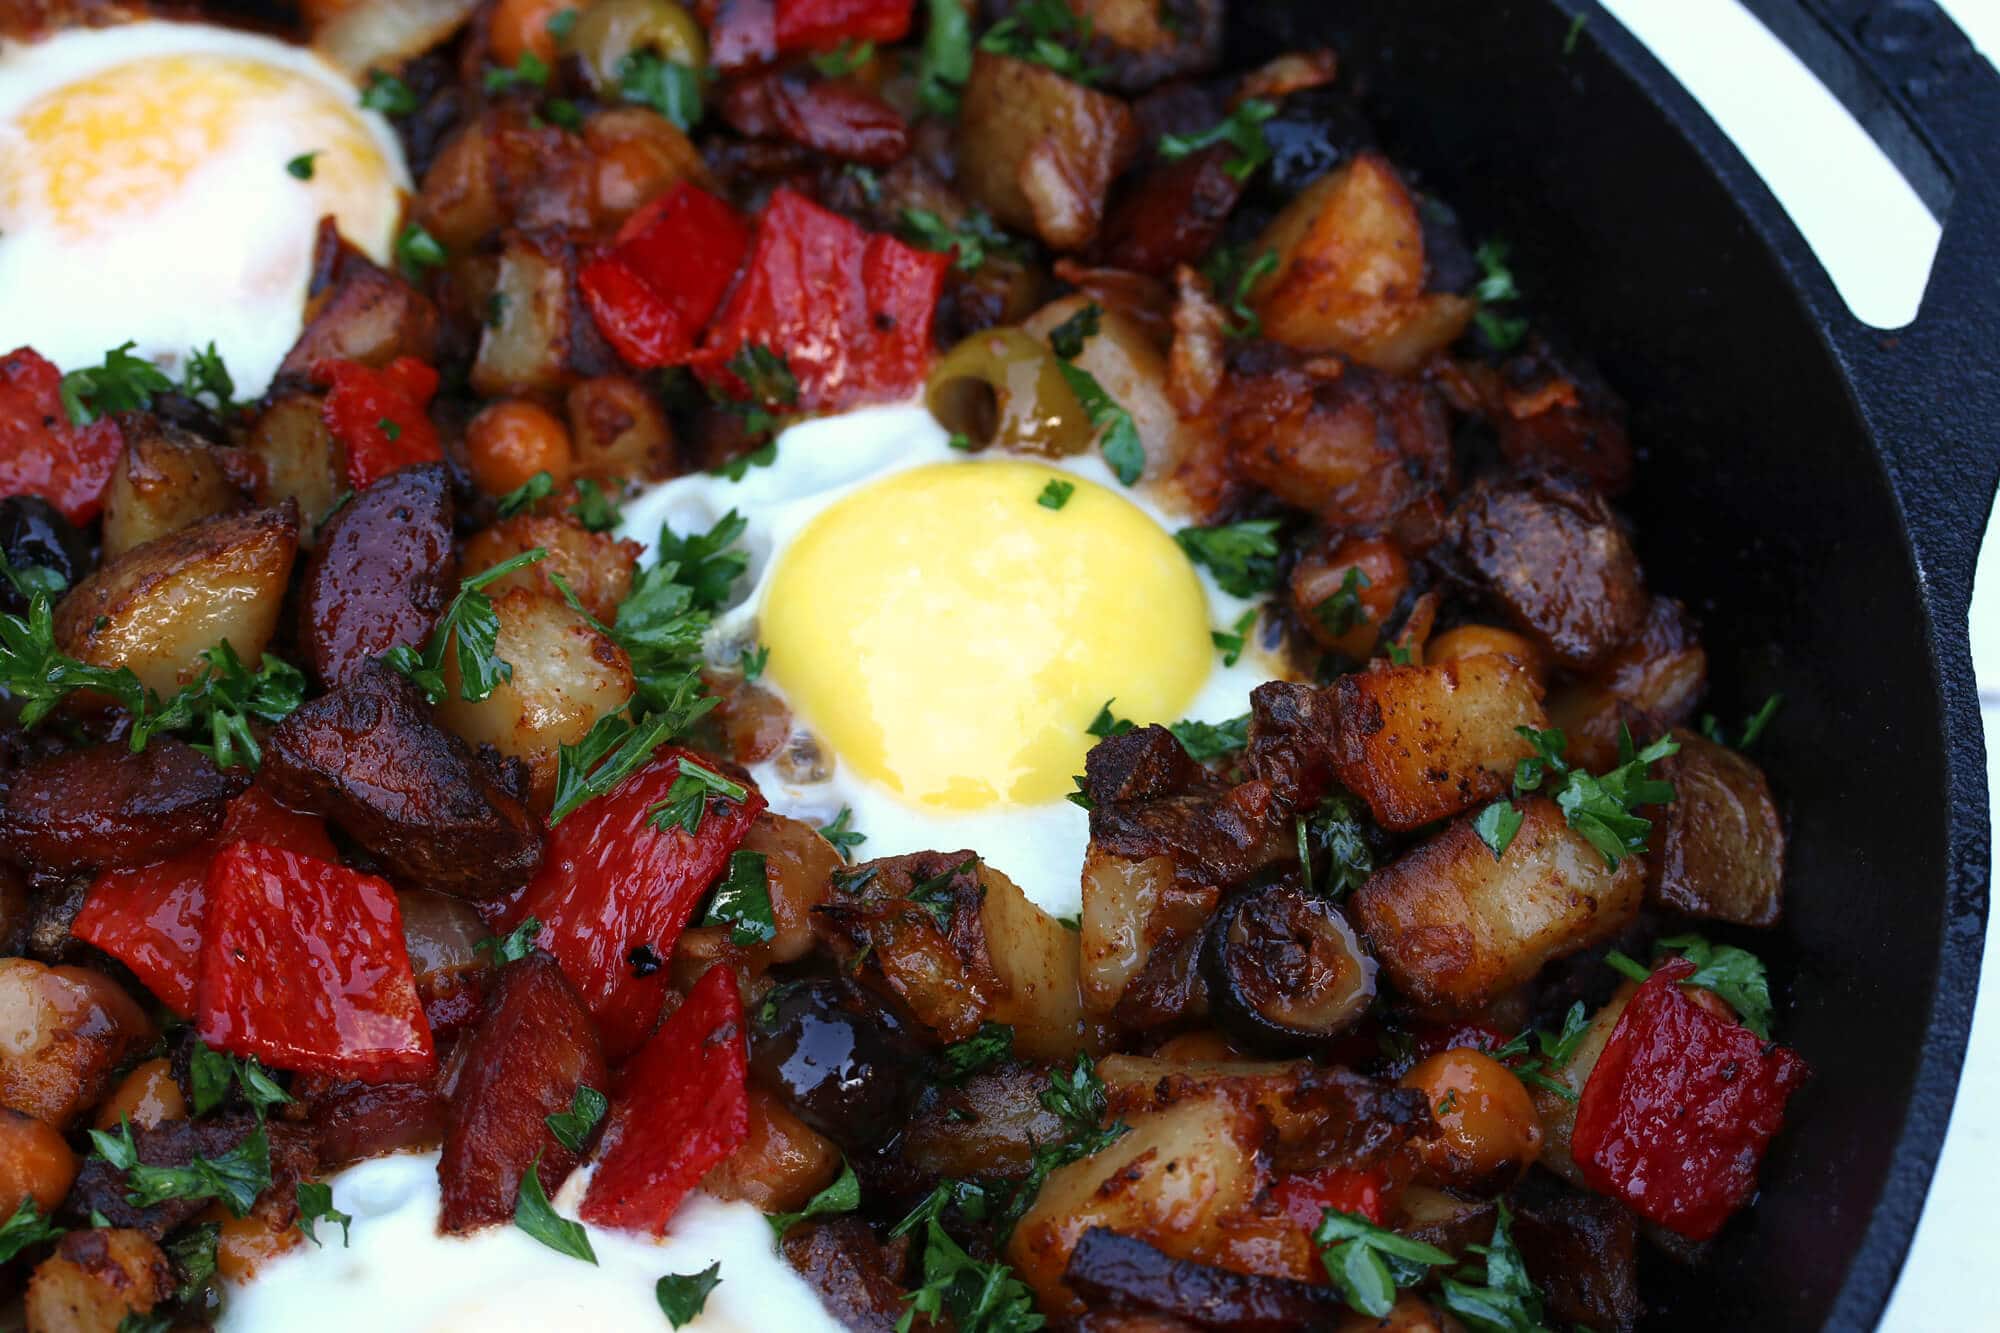 portuguese potato hash linquica sausage olives garbanzo beans chickpeas roasted peppers recipe